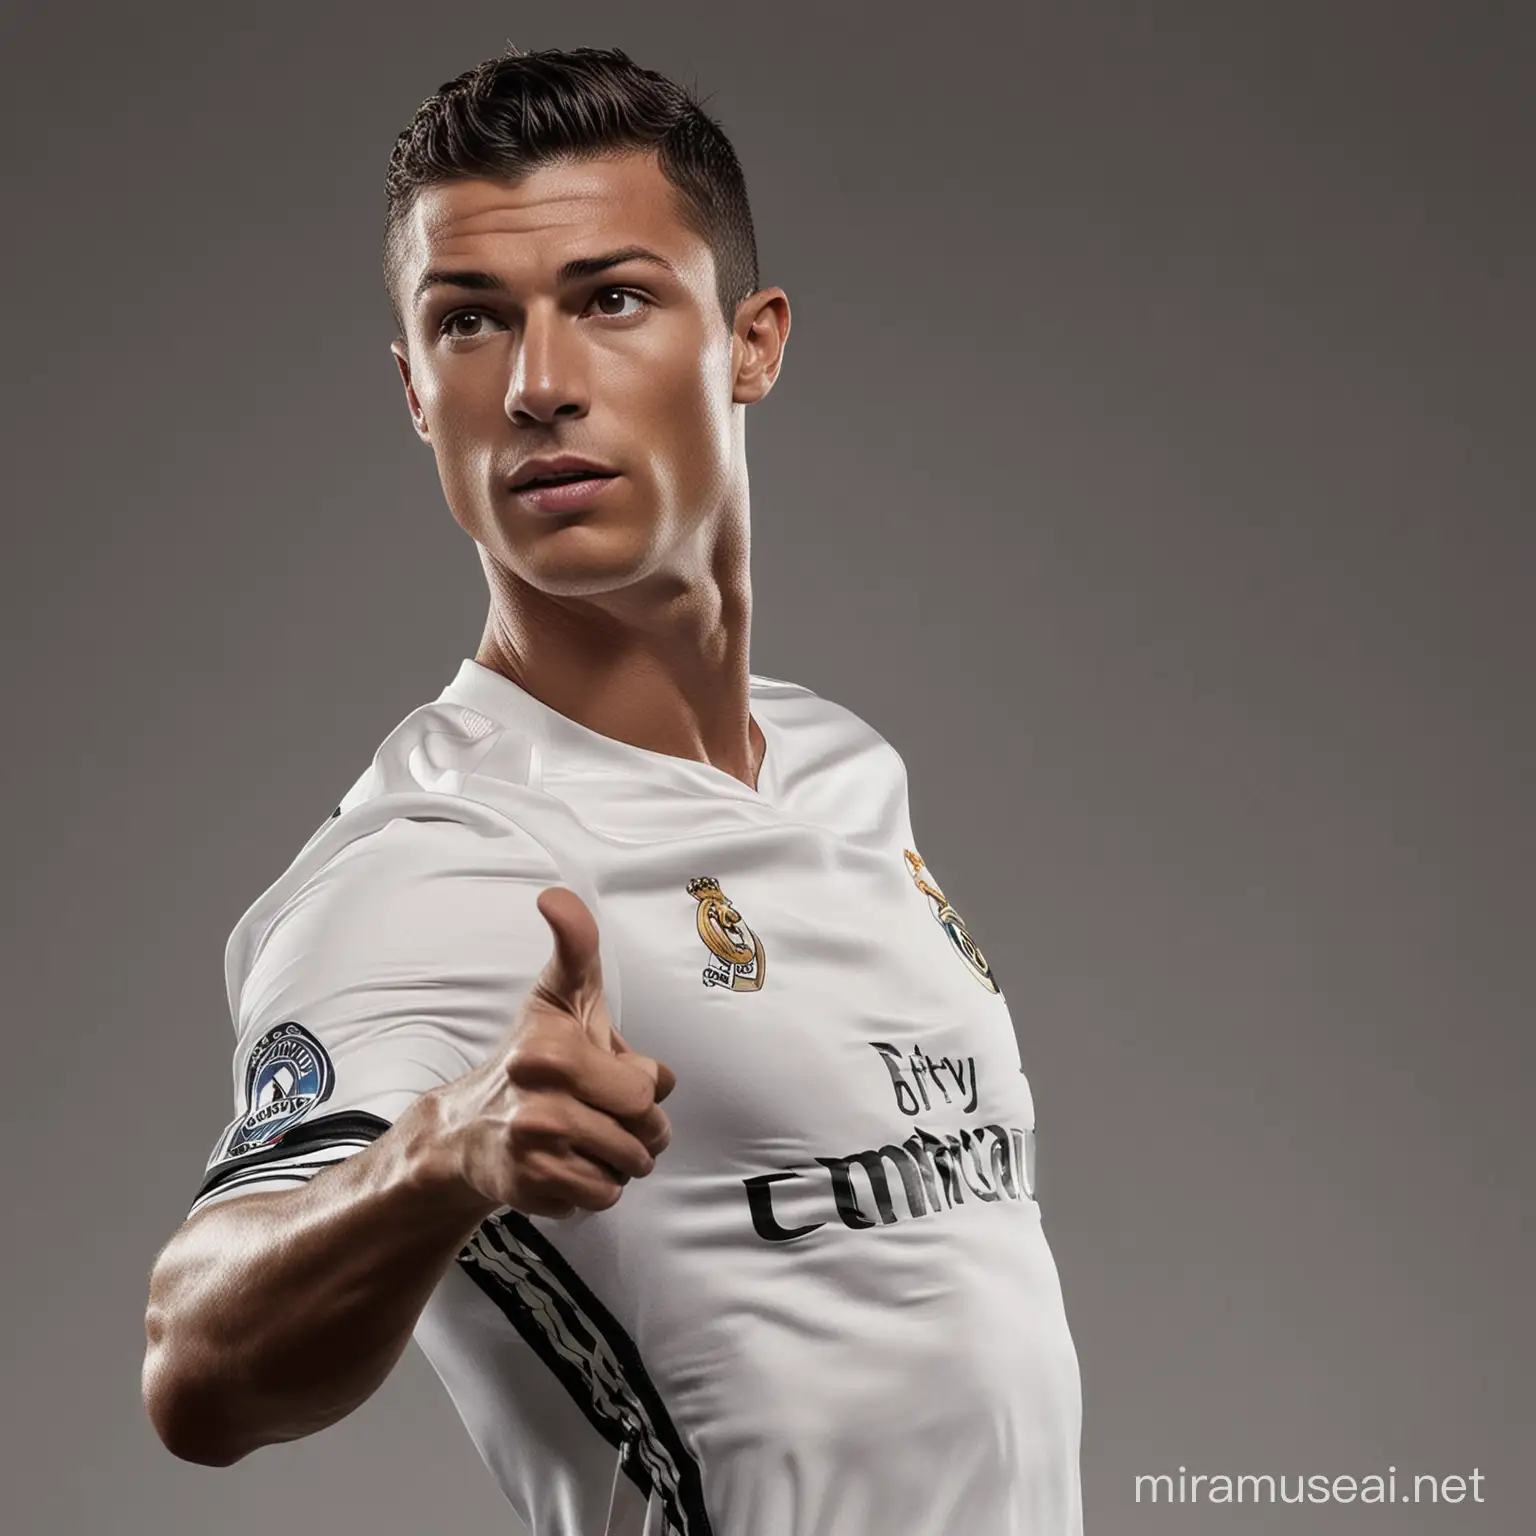 "Capture the Cristiano charisma! Channel his magnetic presence with a captivating and confident pose."
